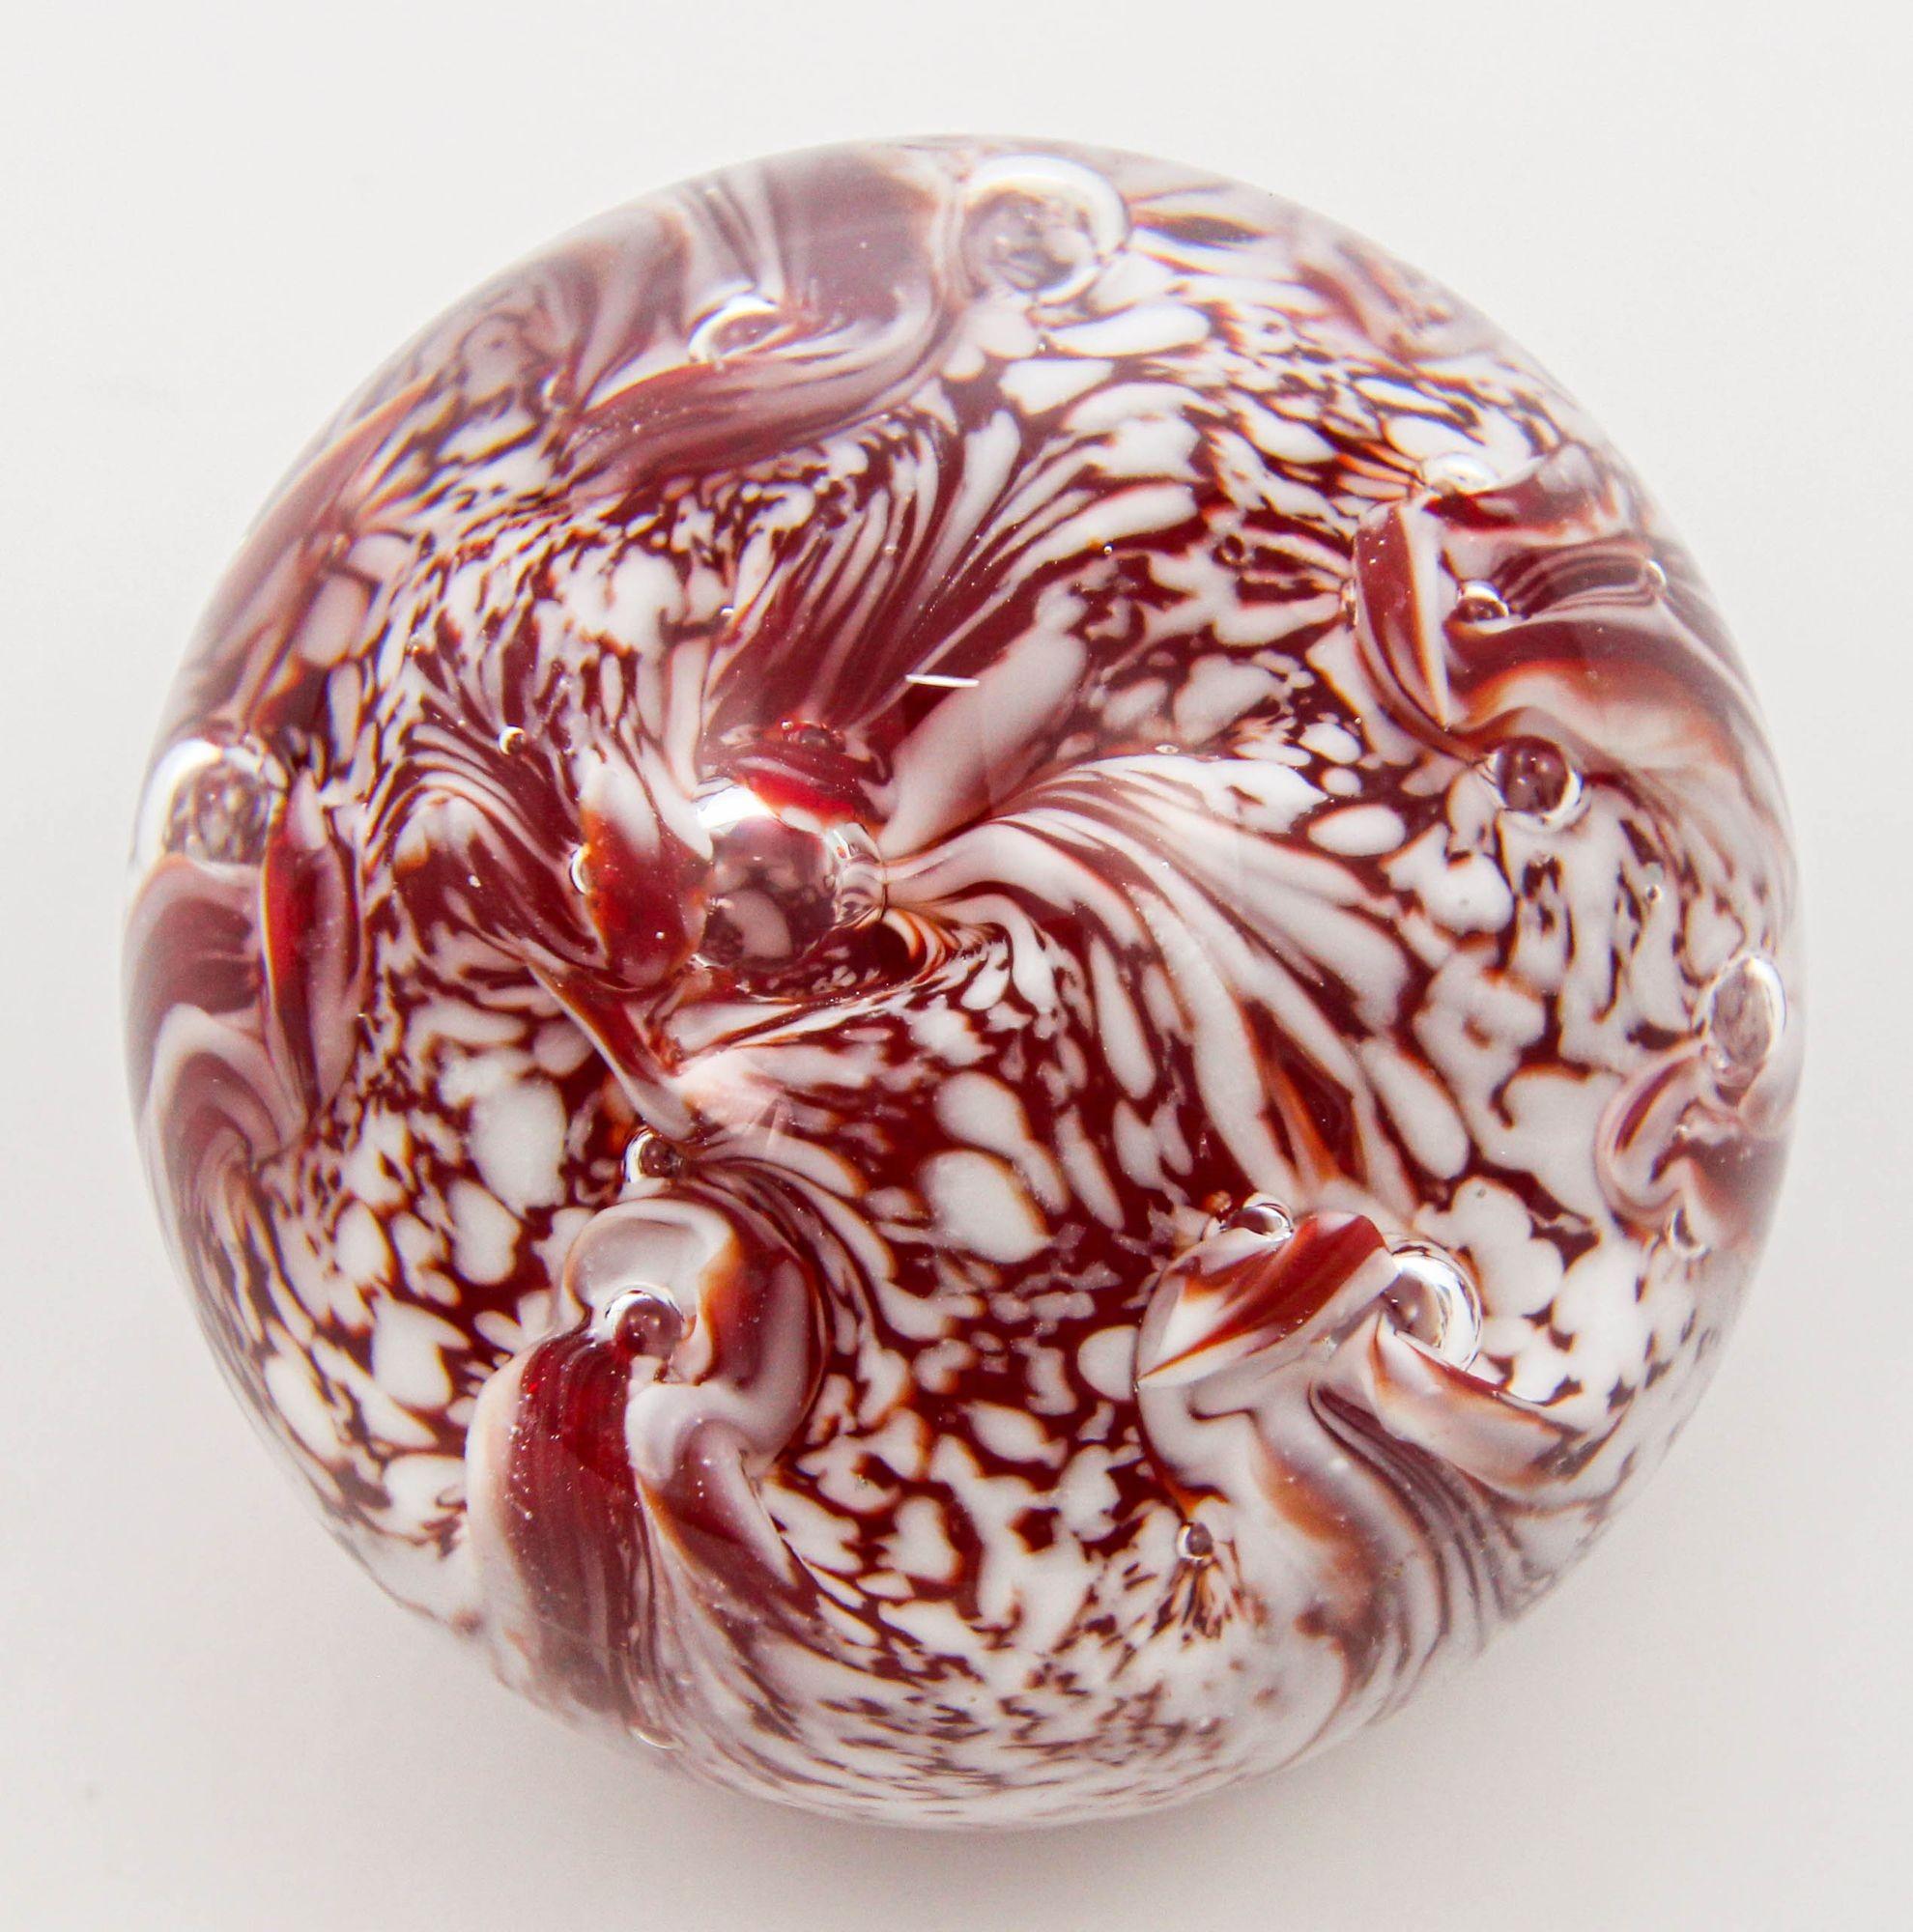 Vintage Crystal Art Glass Paperweight in Red and White Swirl.
Handcrafted in Hungary still retained the paper sticker: 